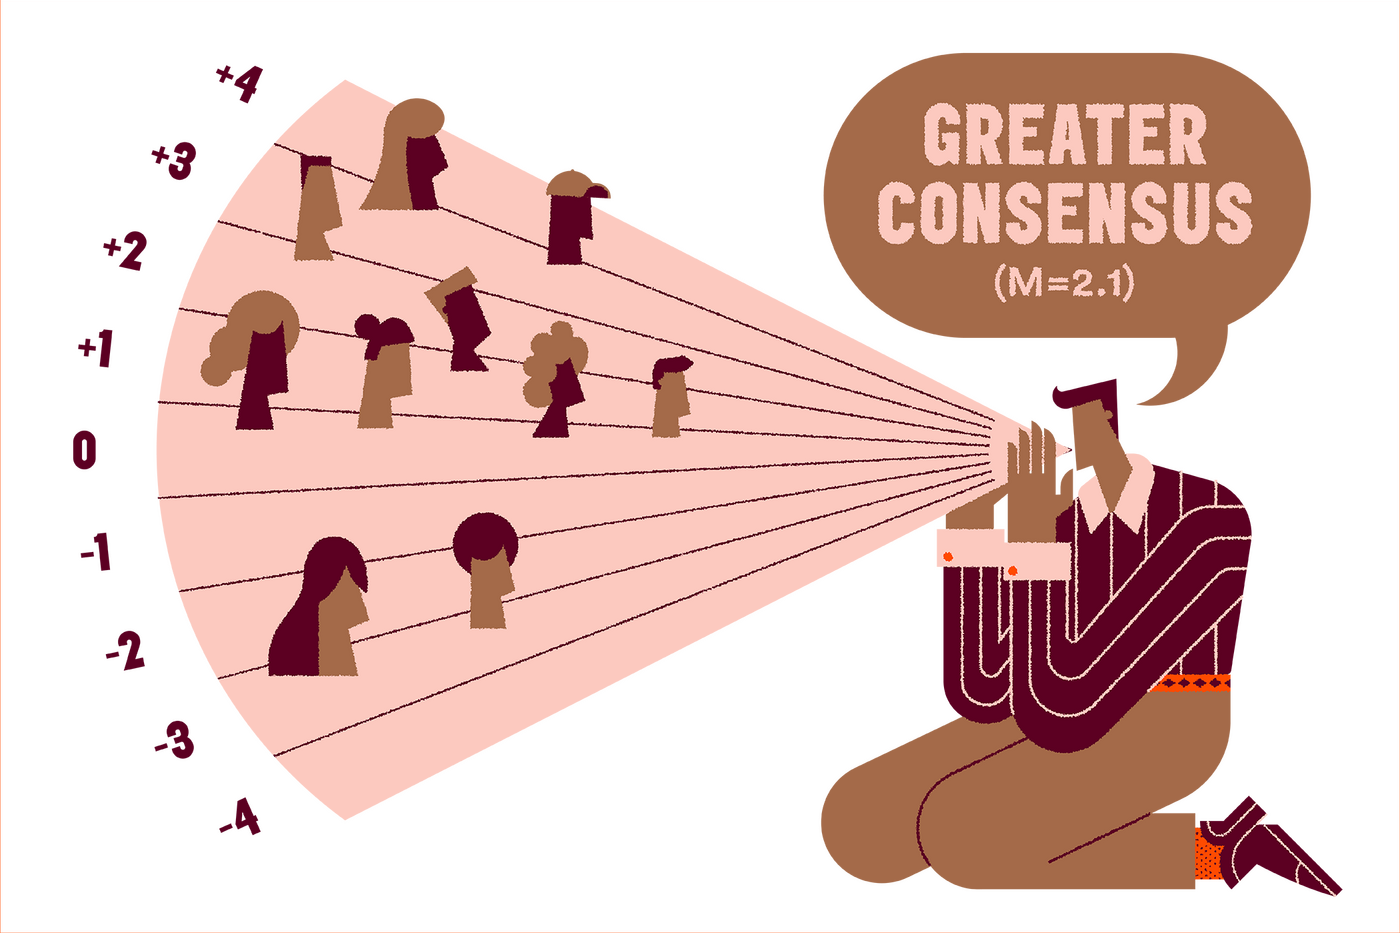 An illustration depicting a consensus strategy